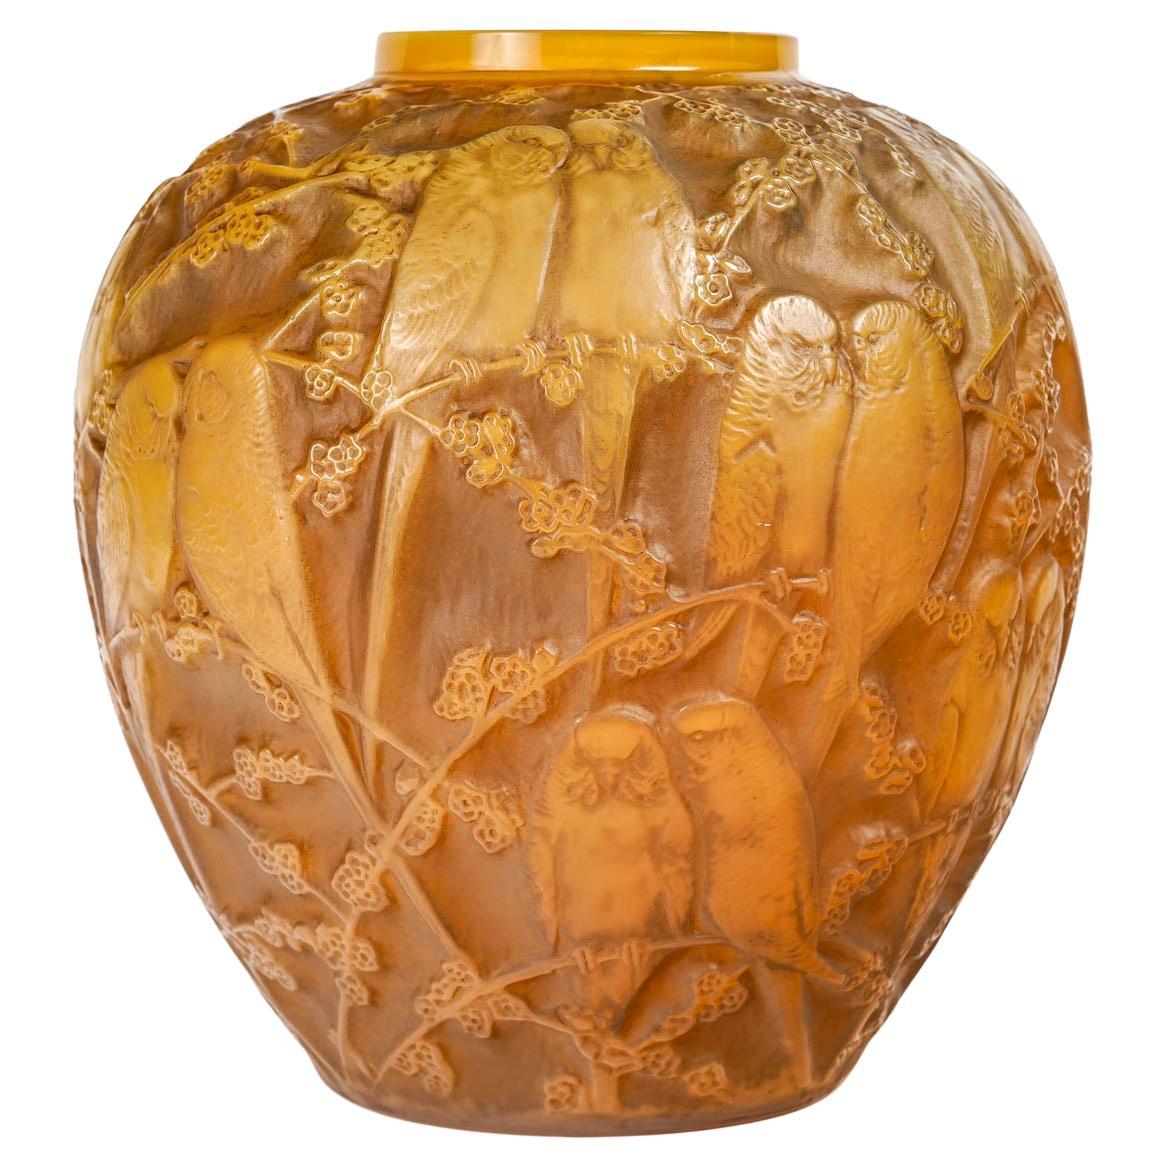 1919 Rene Lalique Vase Perruches Cased Butterscotch Glass with Sepia Patina